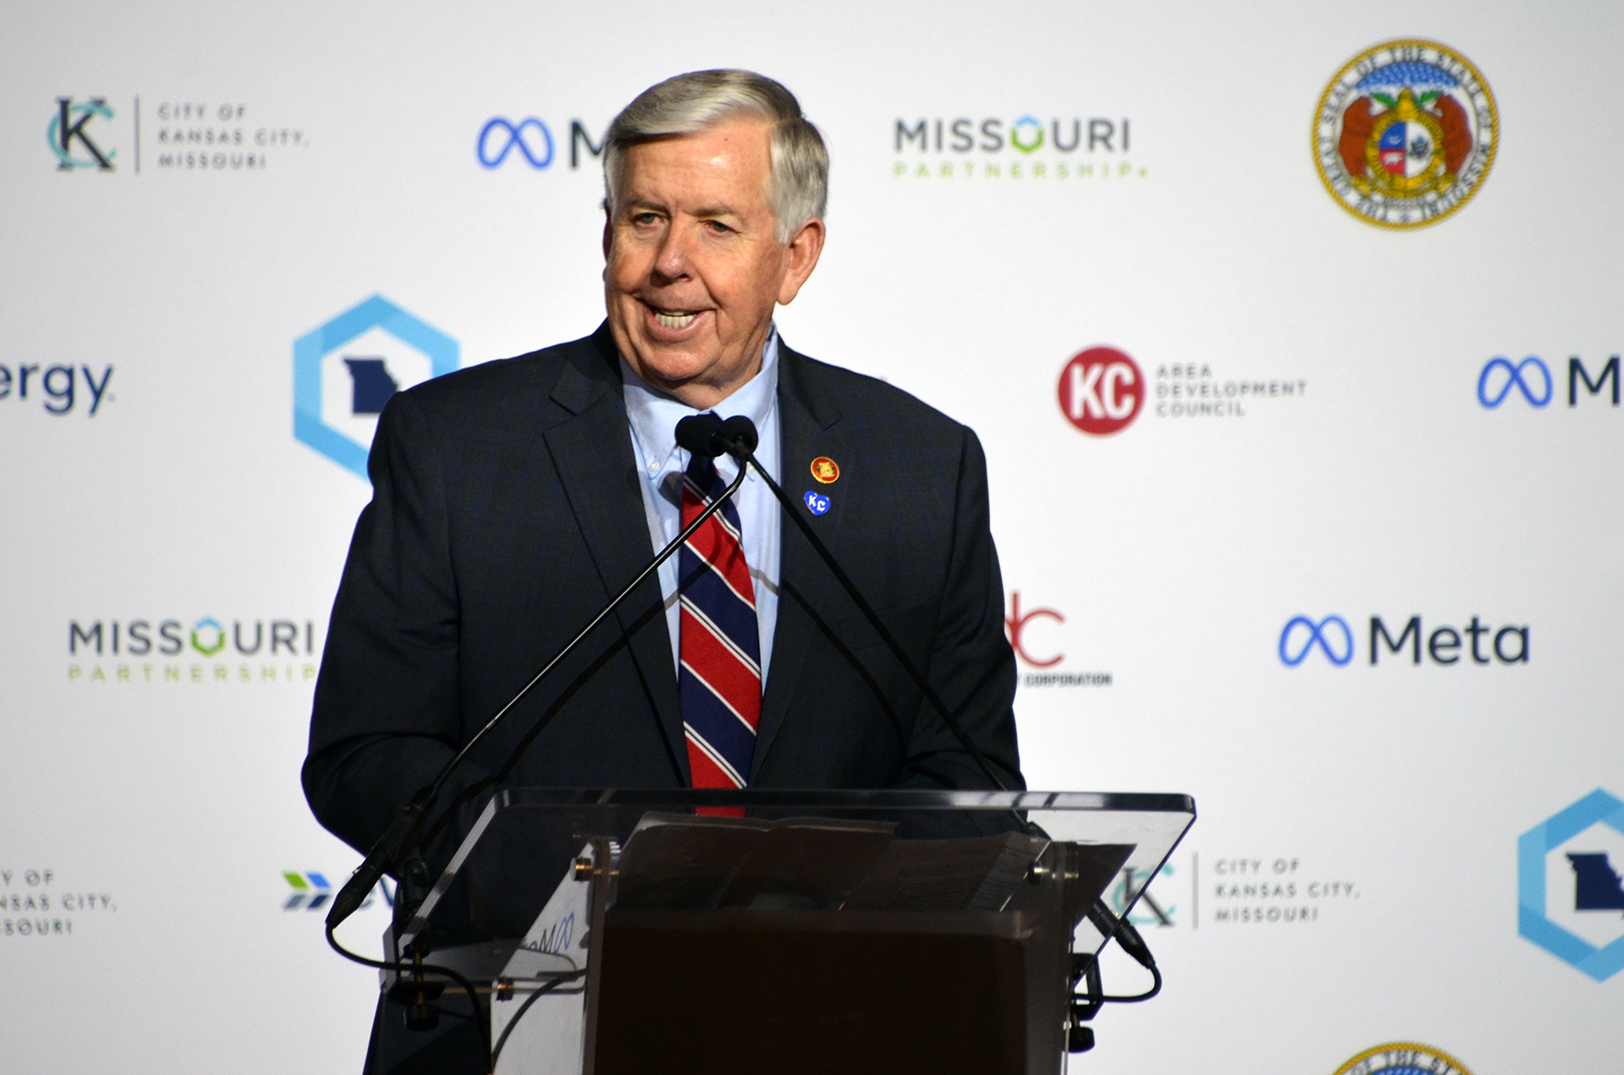 Budget bump to $31M would help MTC attack its 16-point plan for Missouri entrepreneurs; funding fate rests with governor